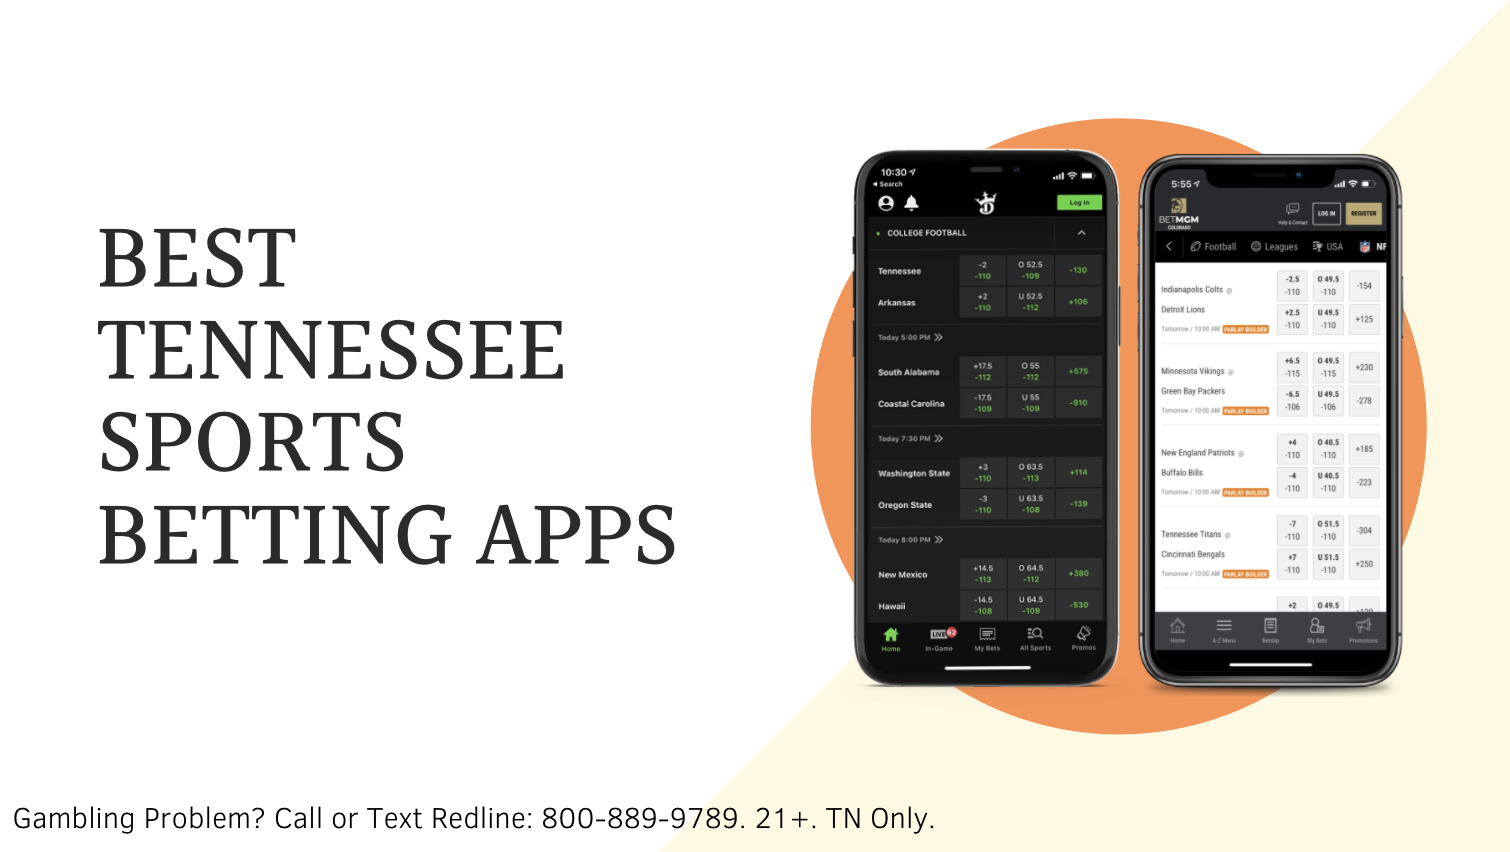 Tennessee Sports Betting 2020 - Top TN Sports Betting Apps